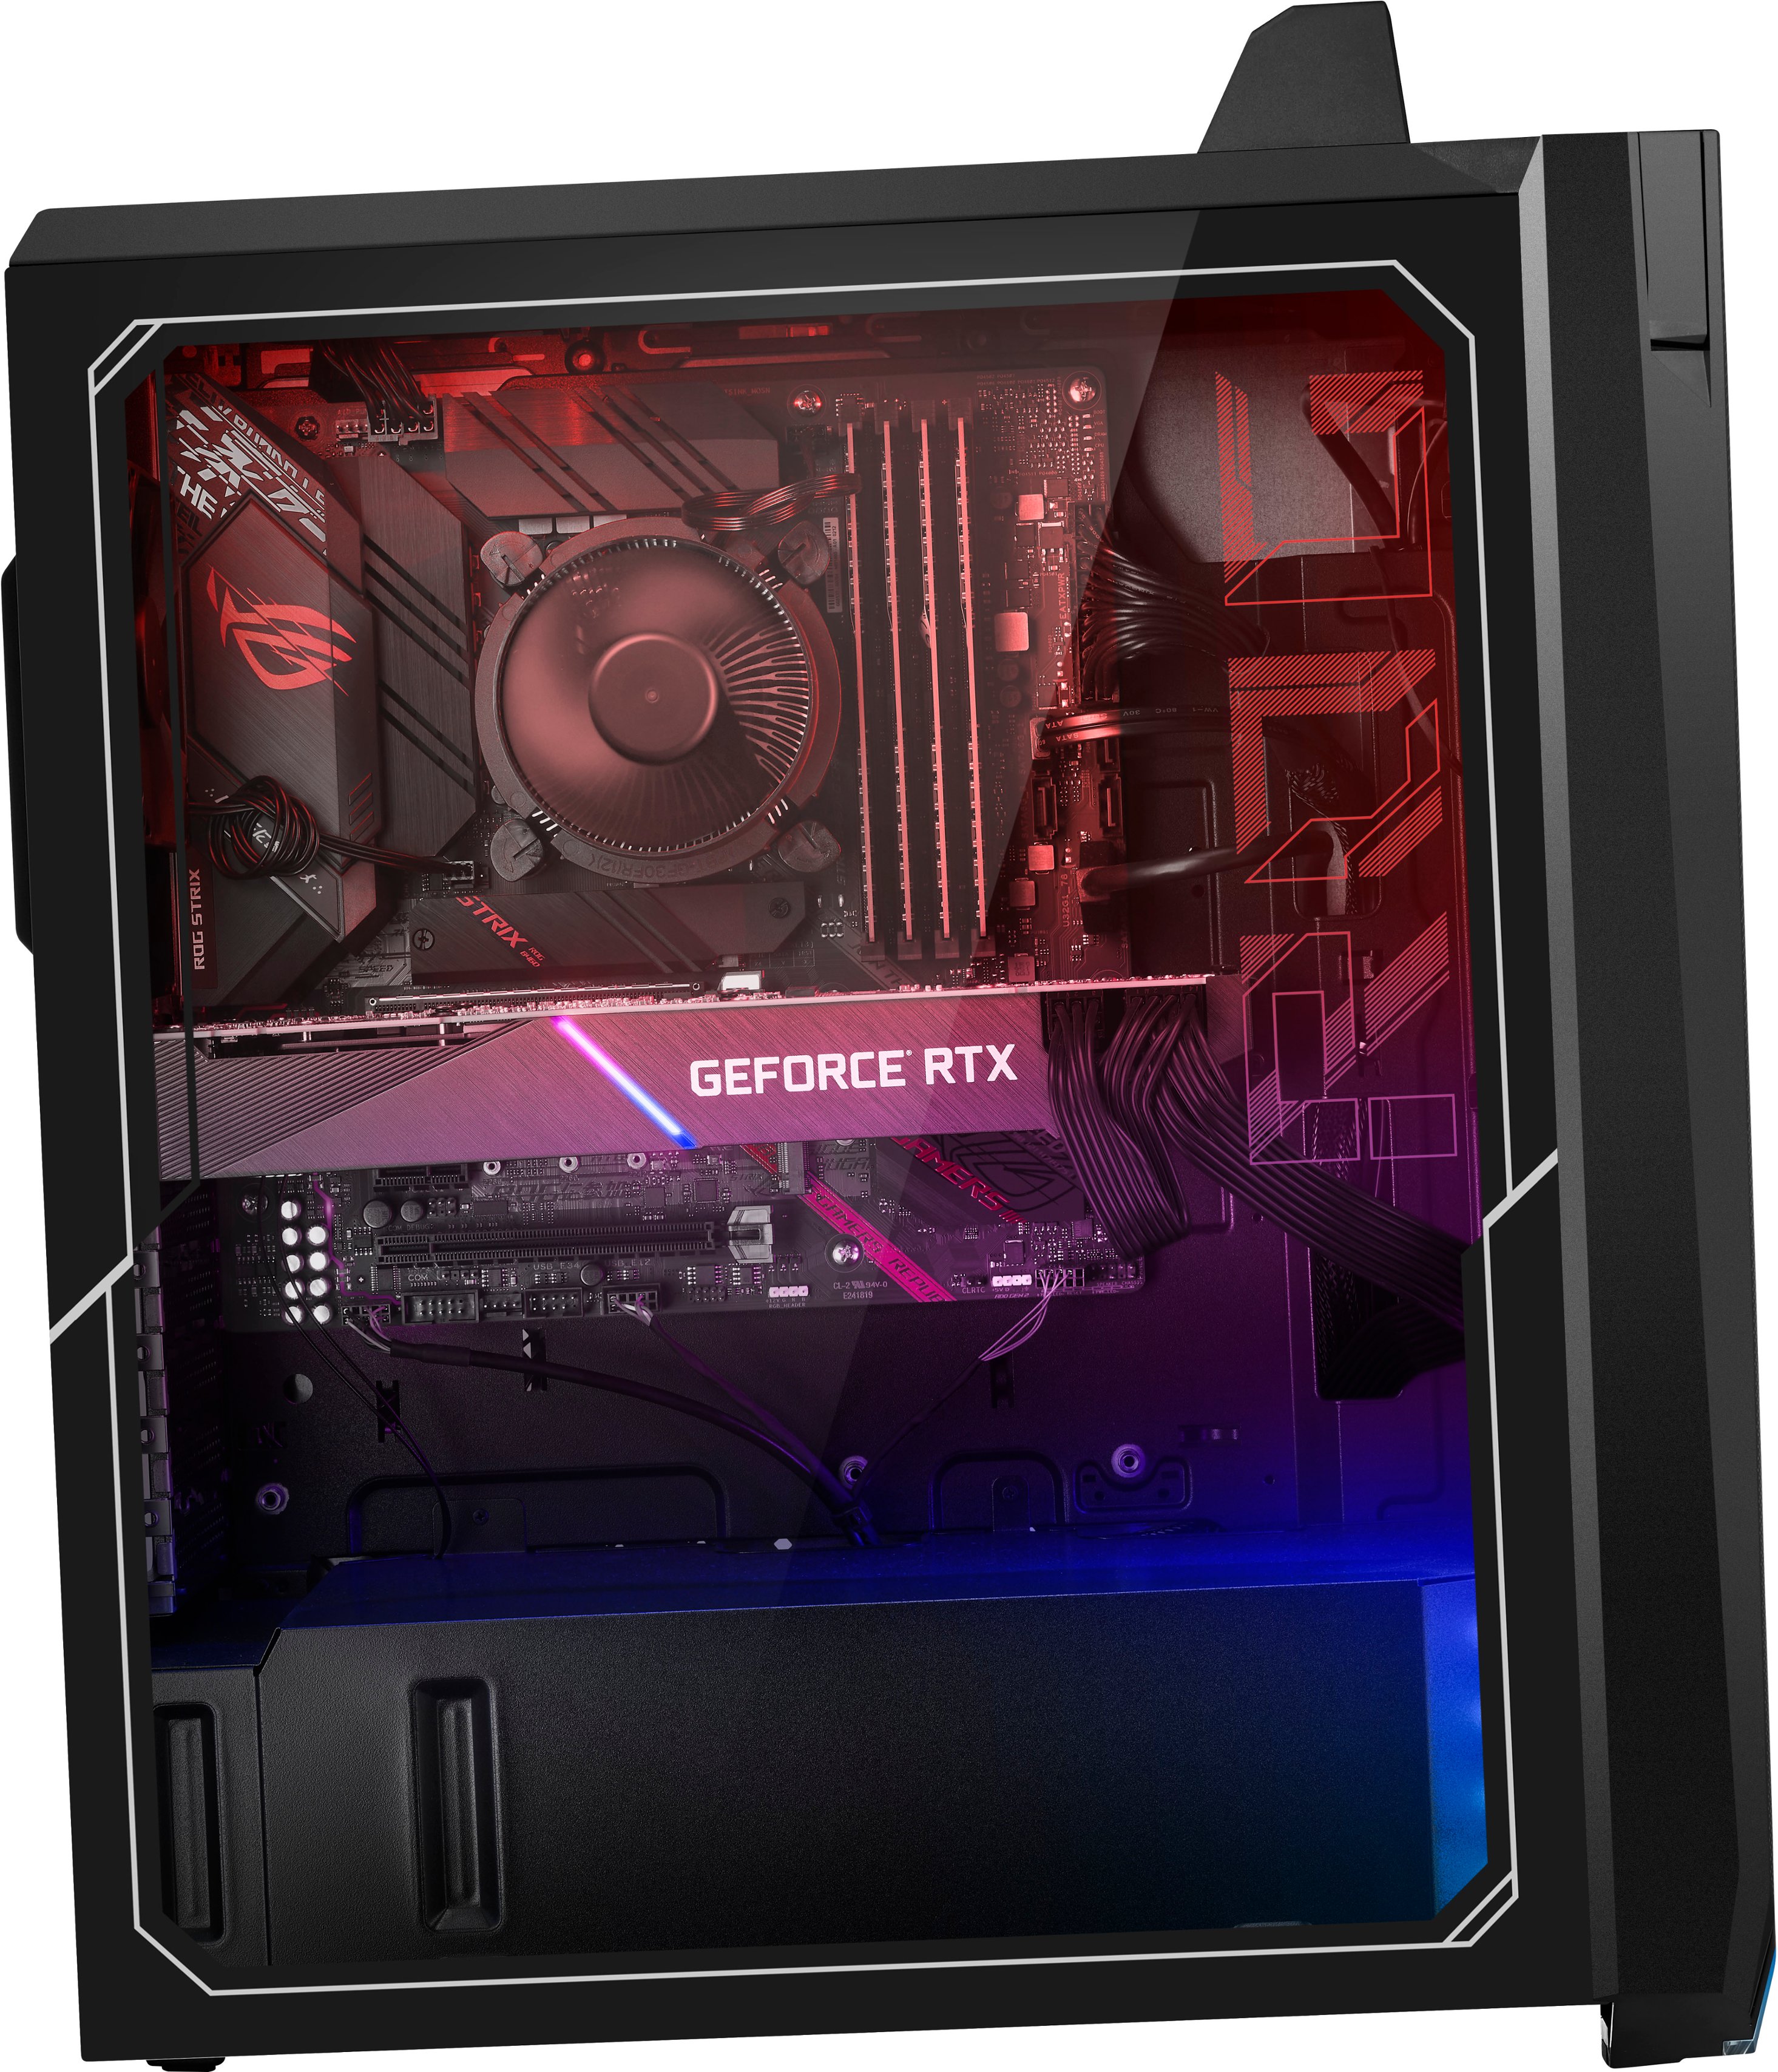 Questions And Answers Asus Rog Gaming Desktop Intel Core I7 11700kf 16gb Memory Nvidia Geforce